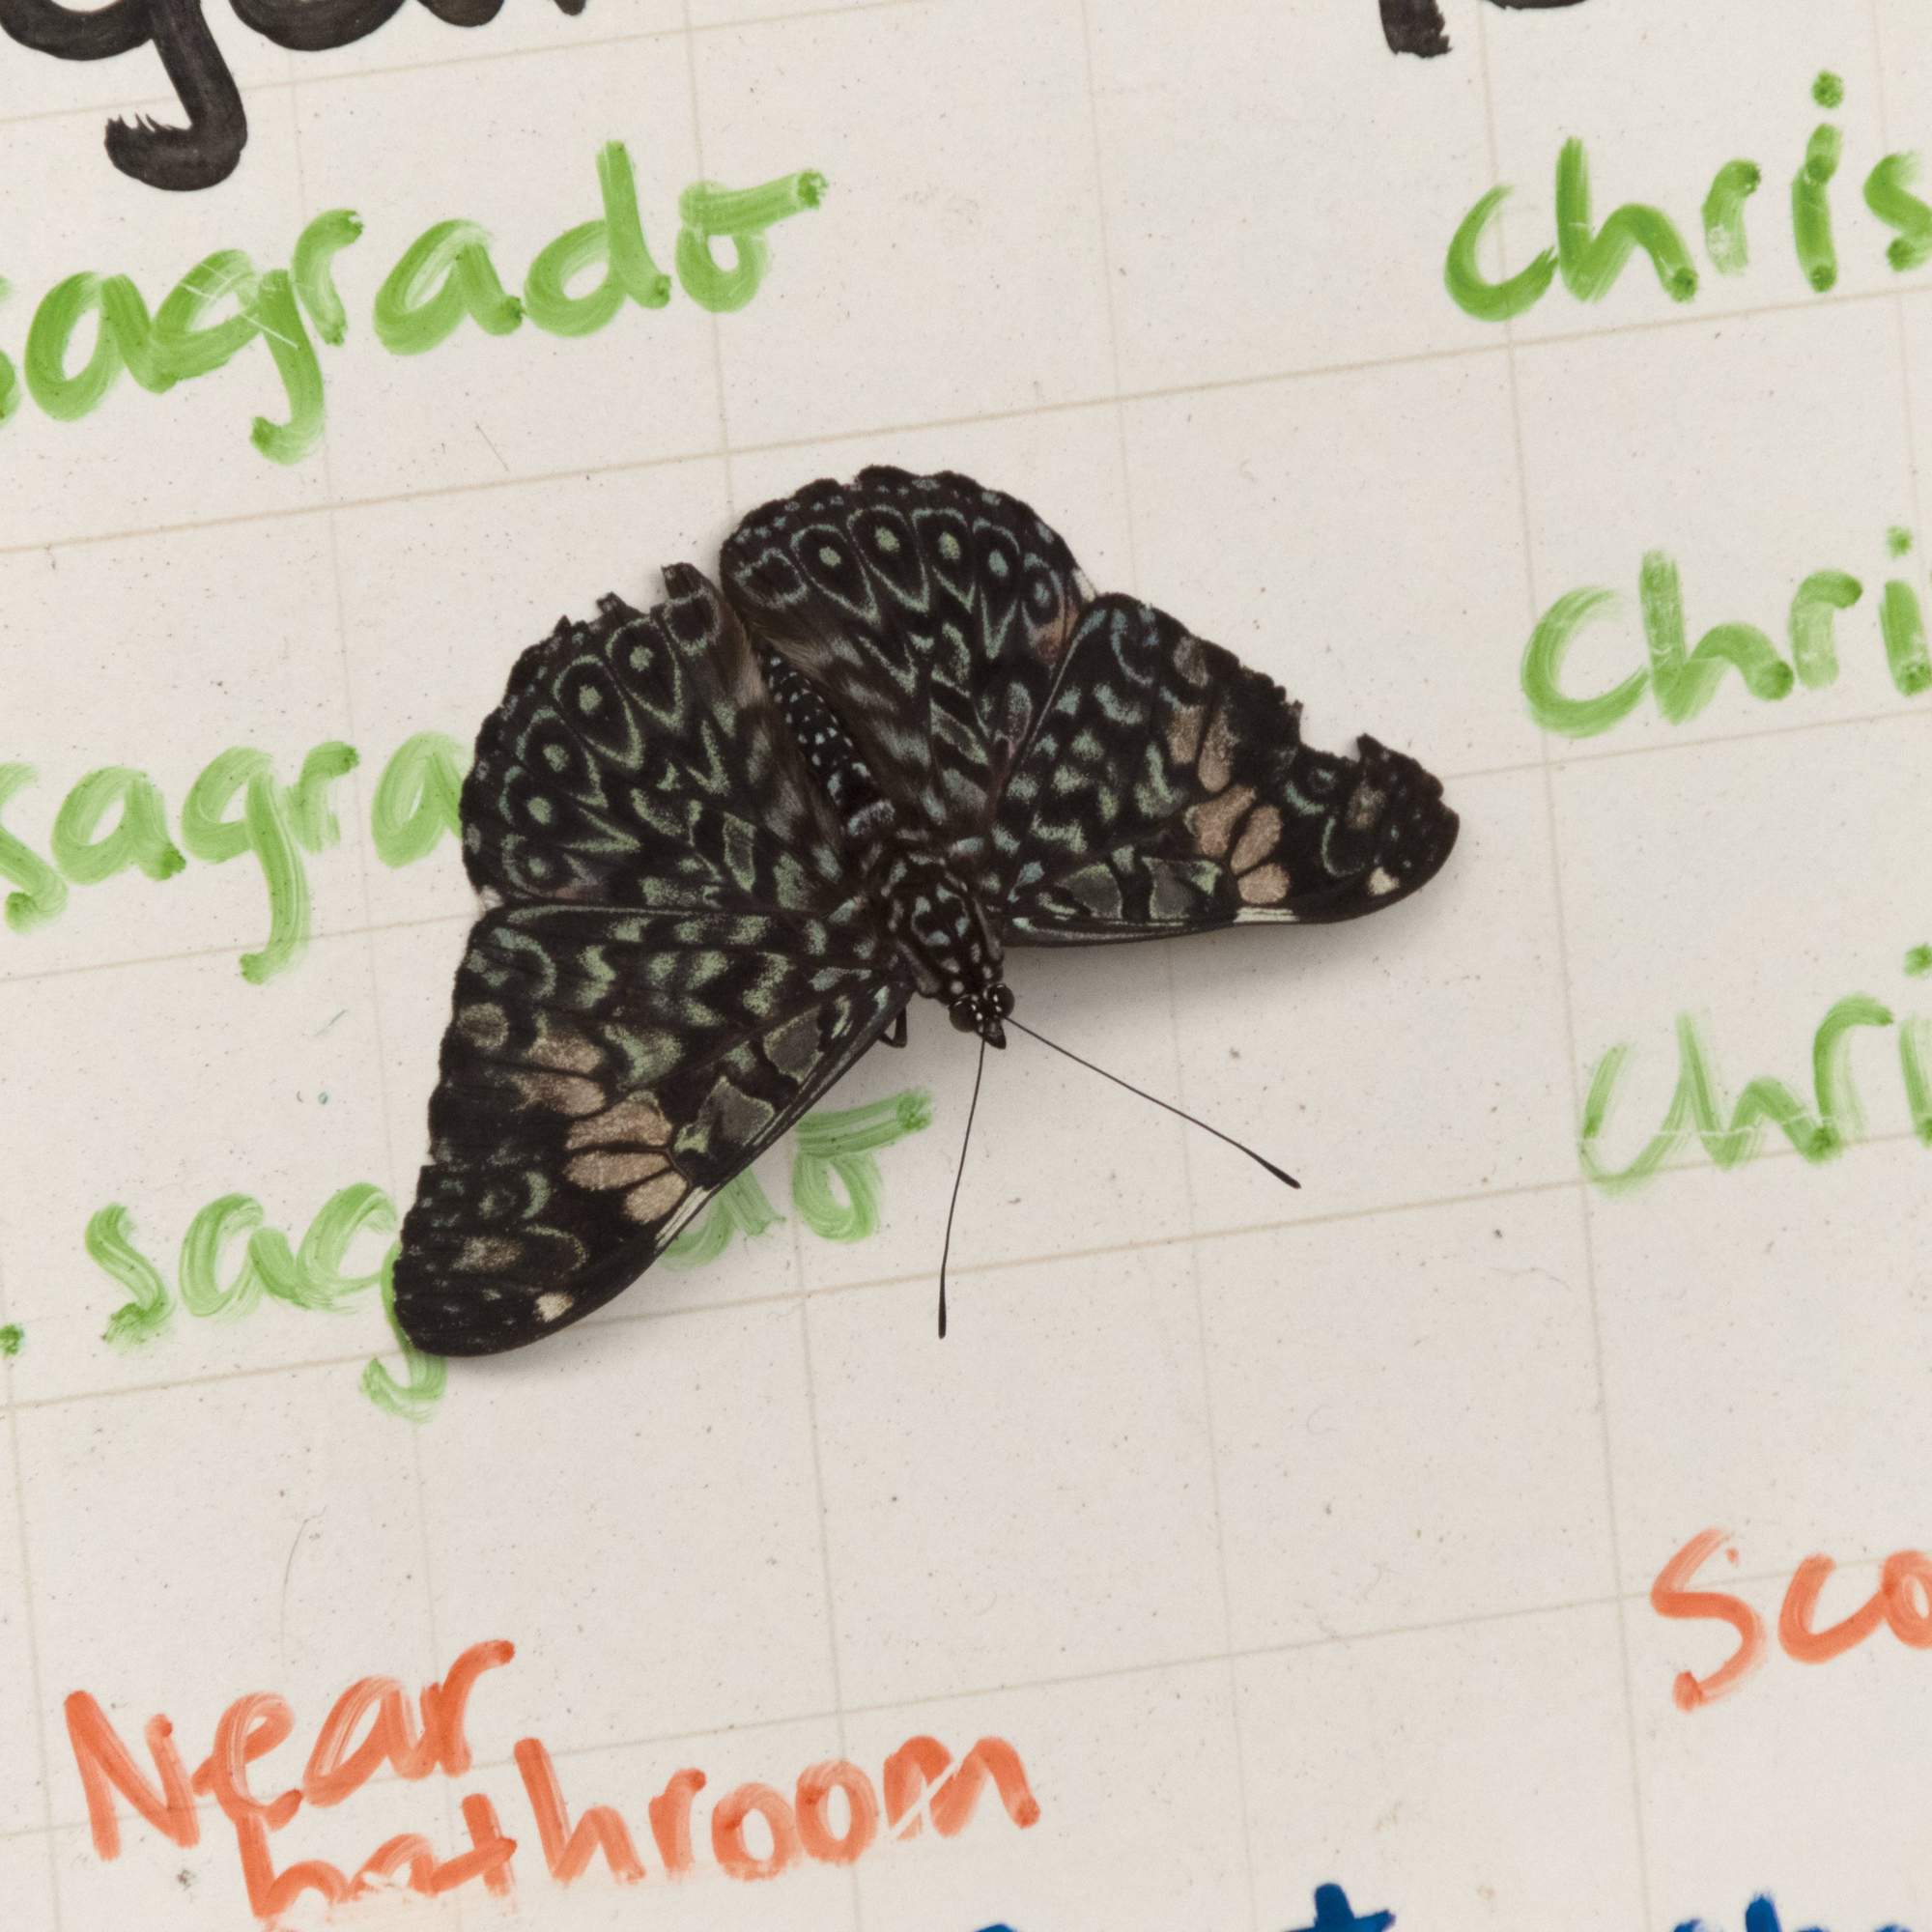 a dark spotted butterfly sits on a whiteboard of biology data